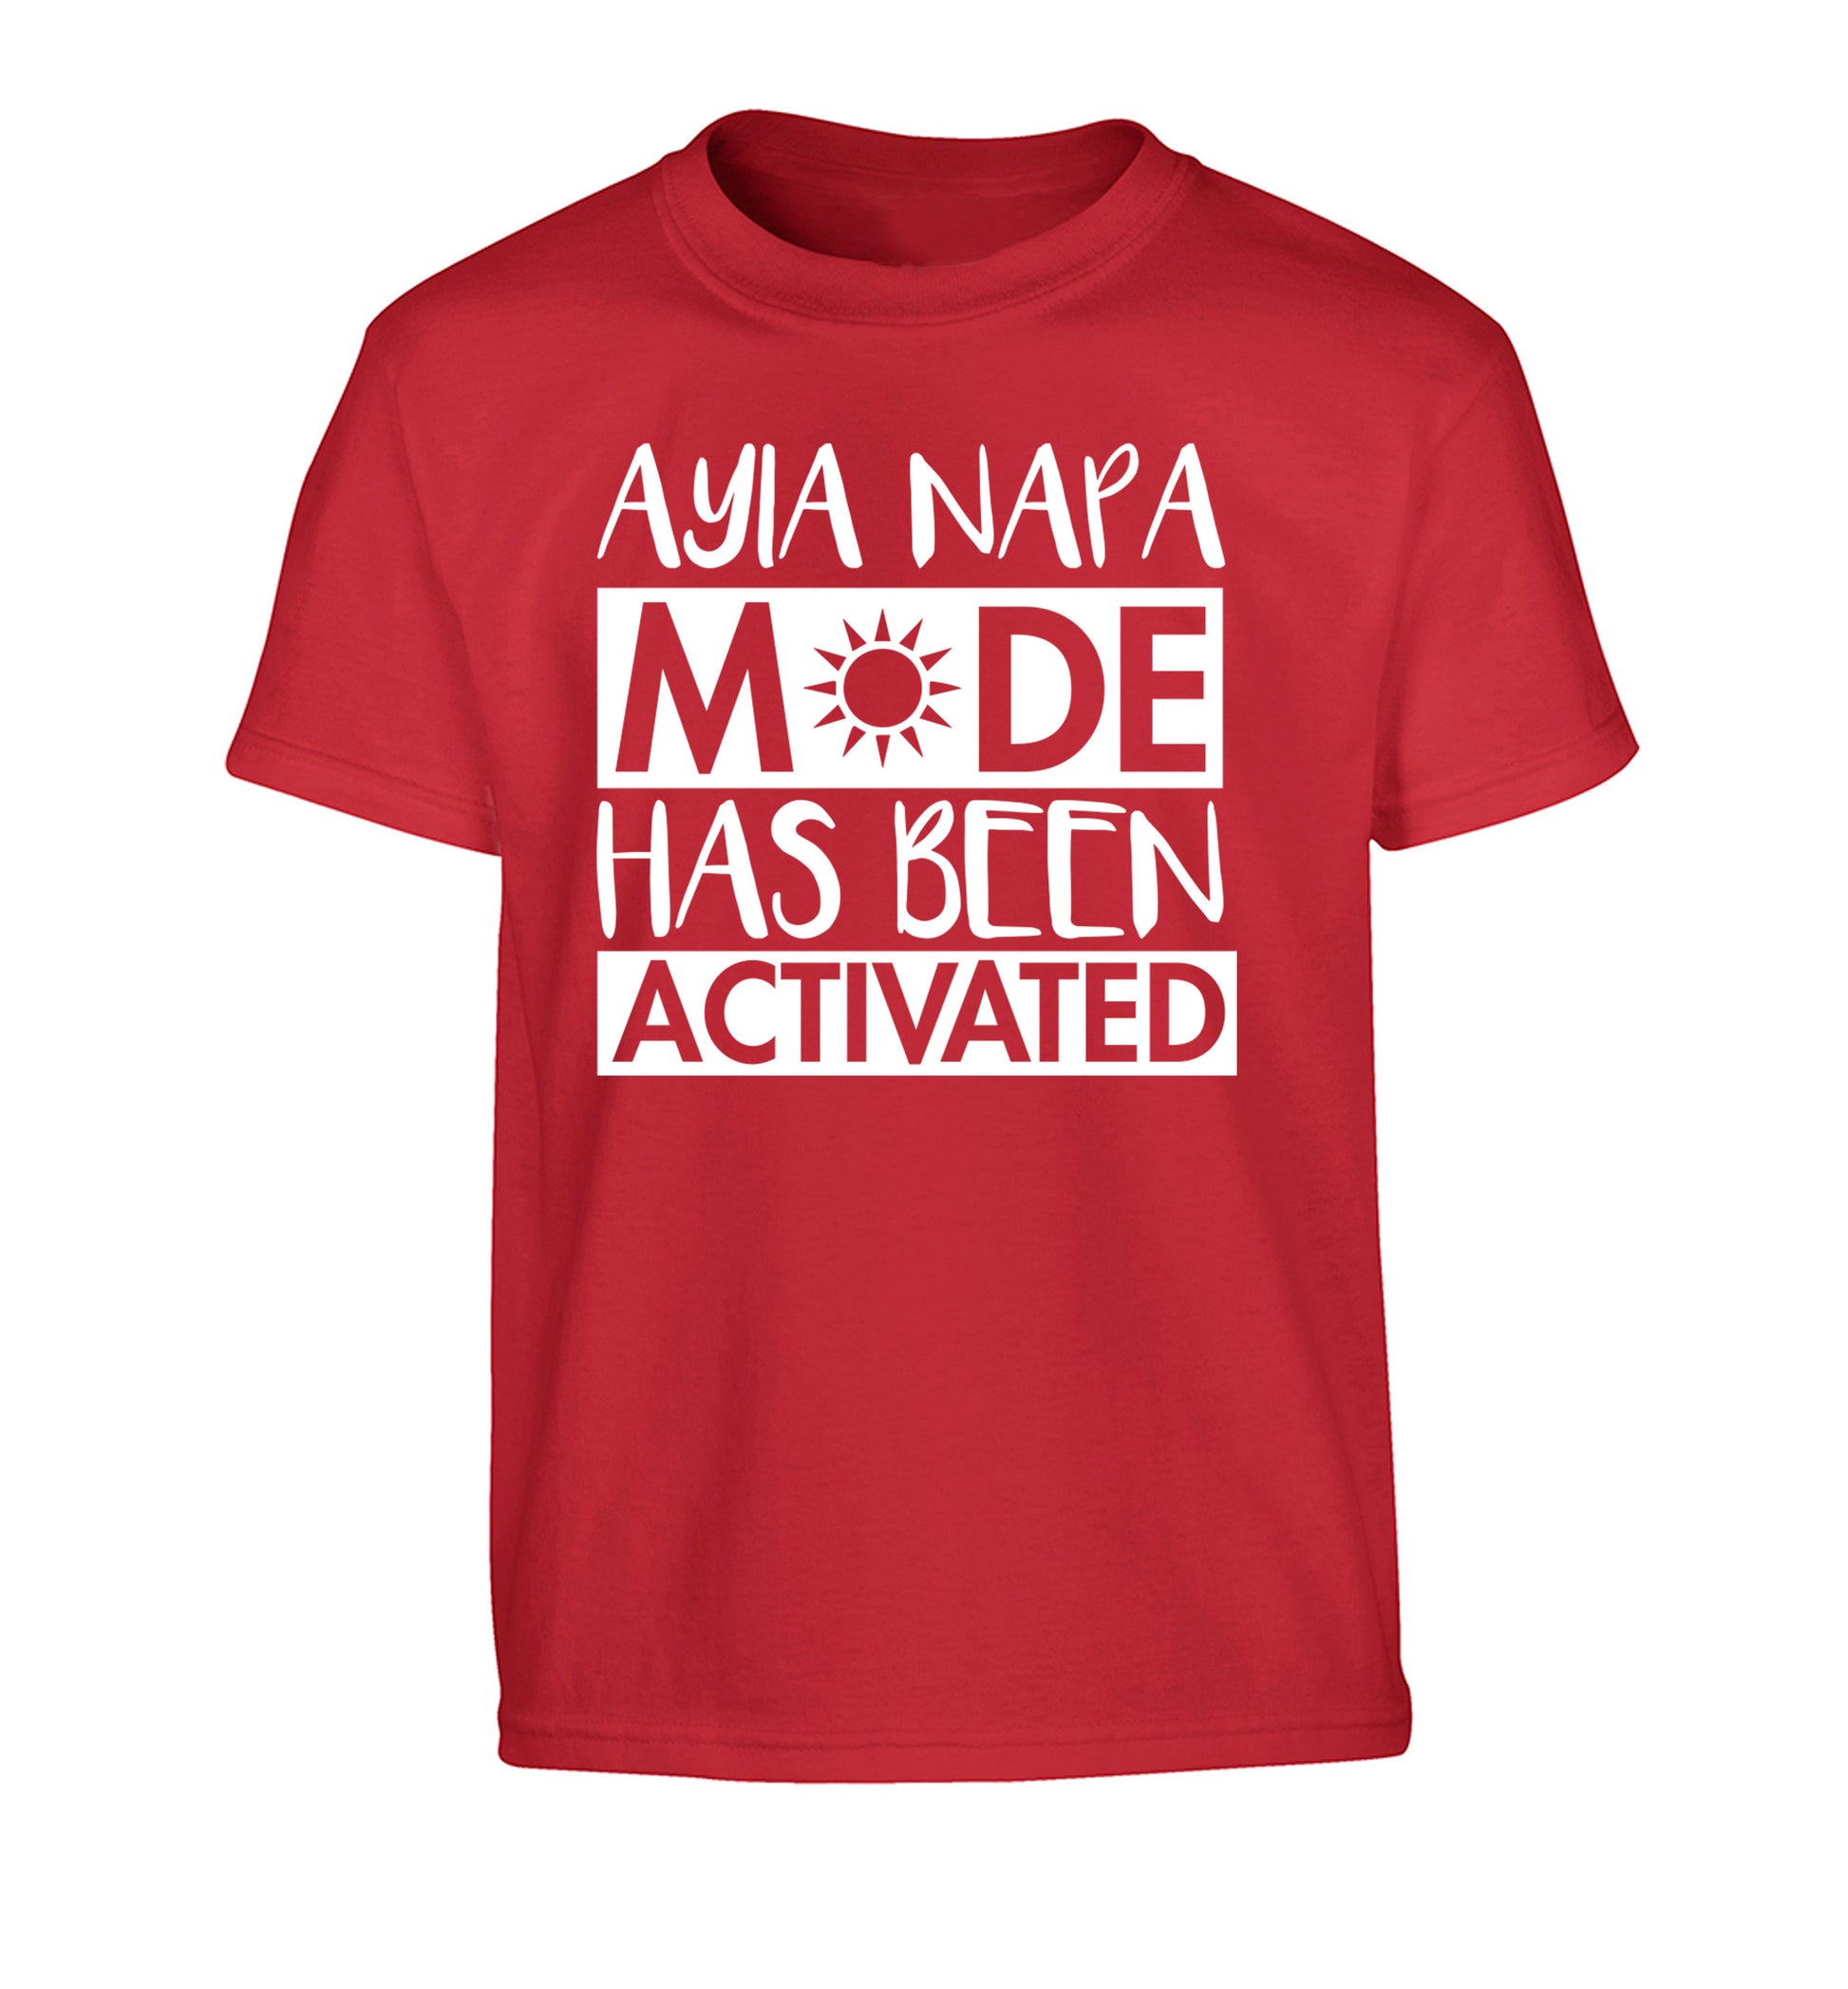 Aiya Napa mode has been activated Children's red Tshirt 12-14 Years